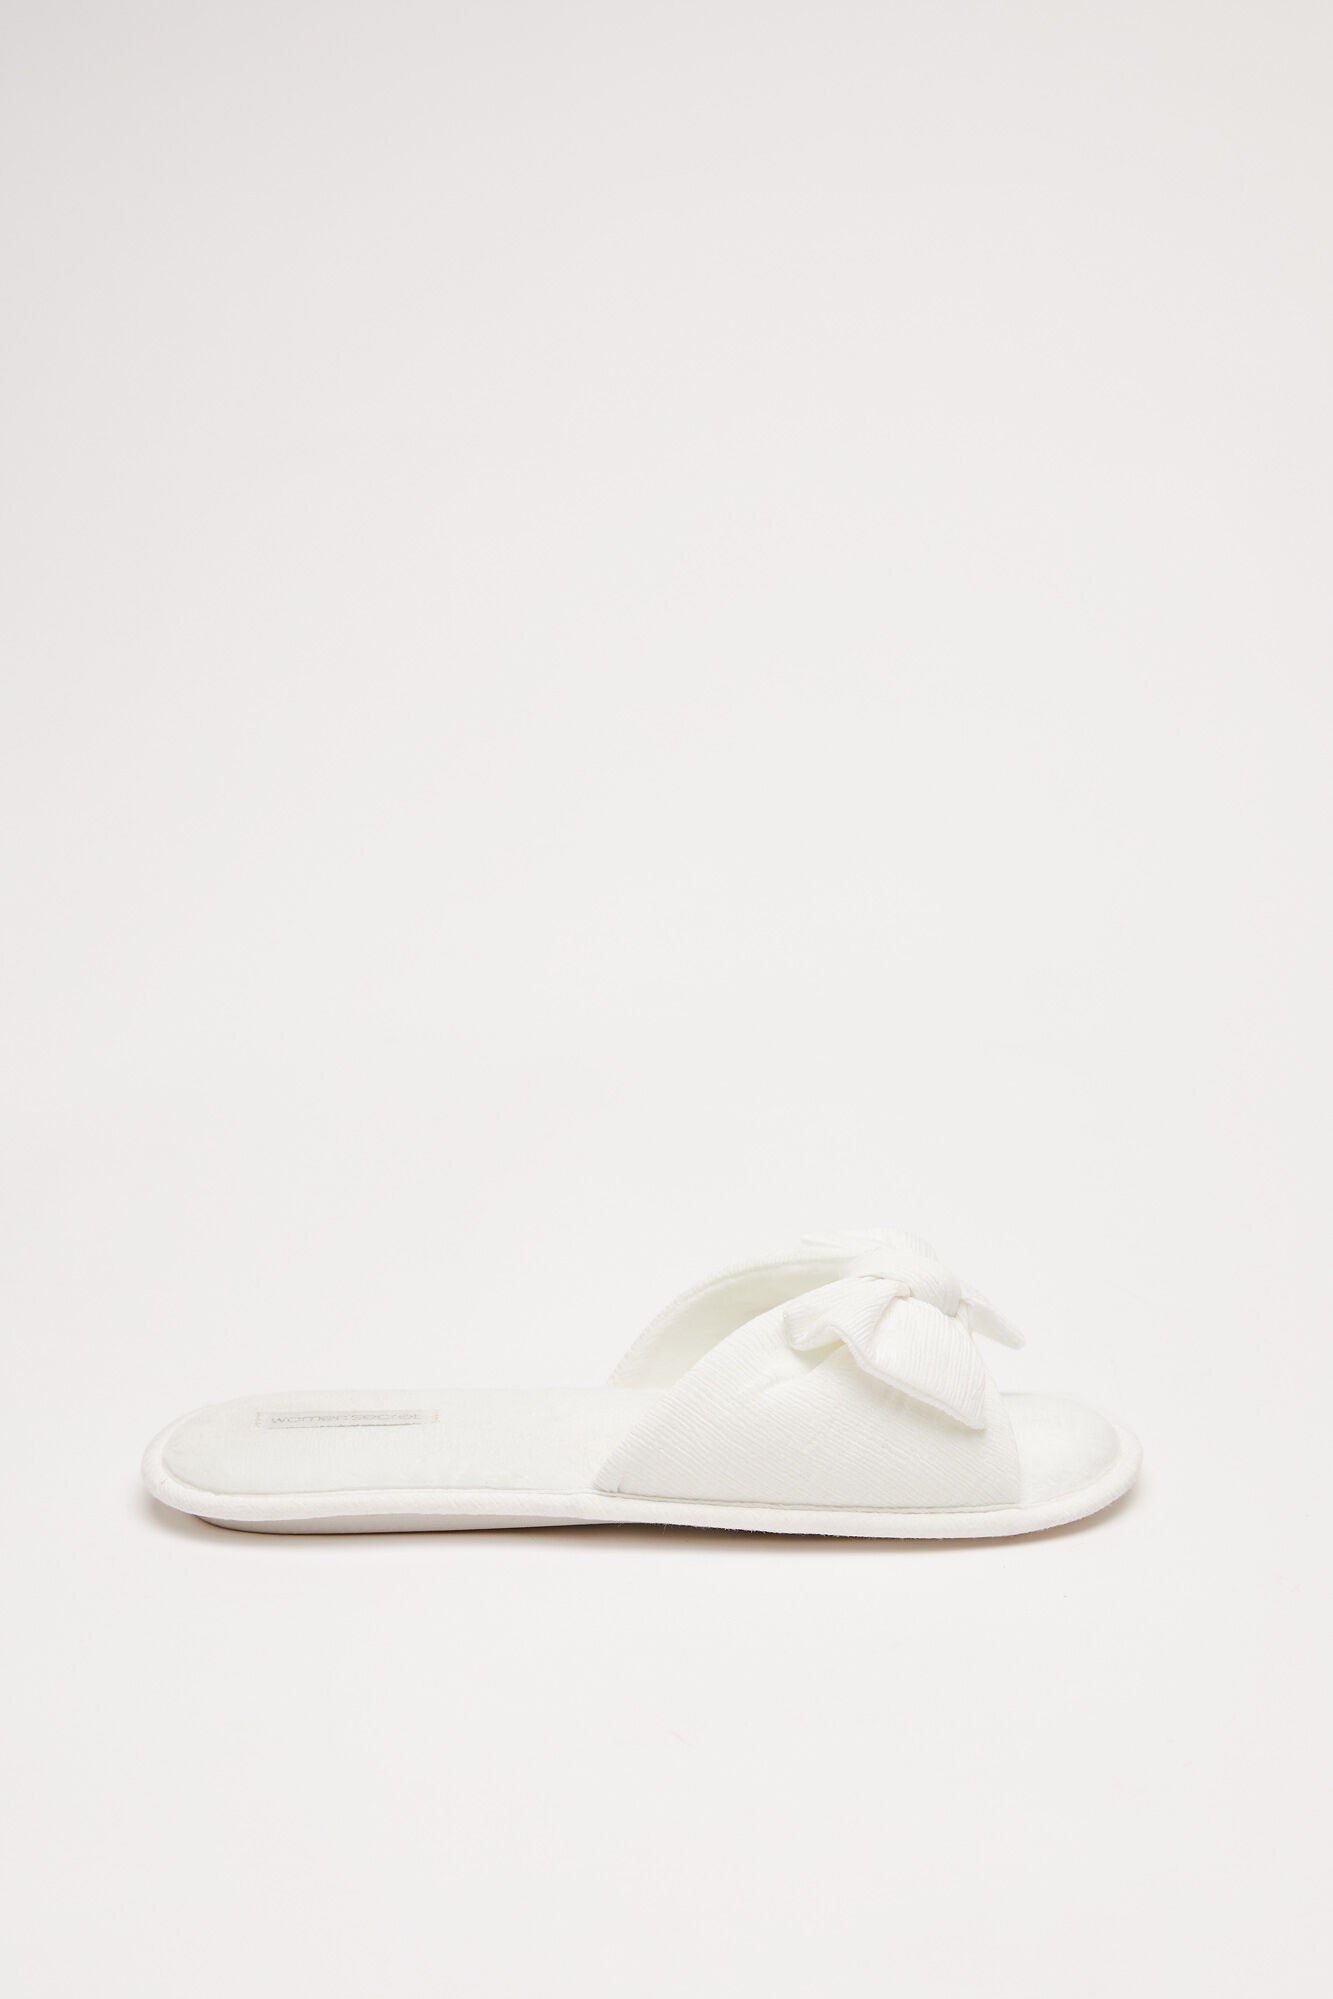 White bow open toed slippers